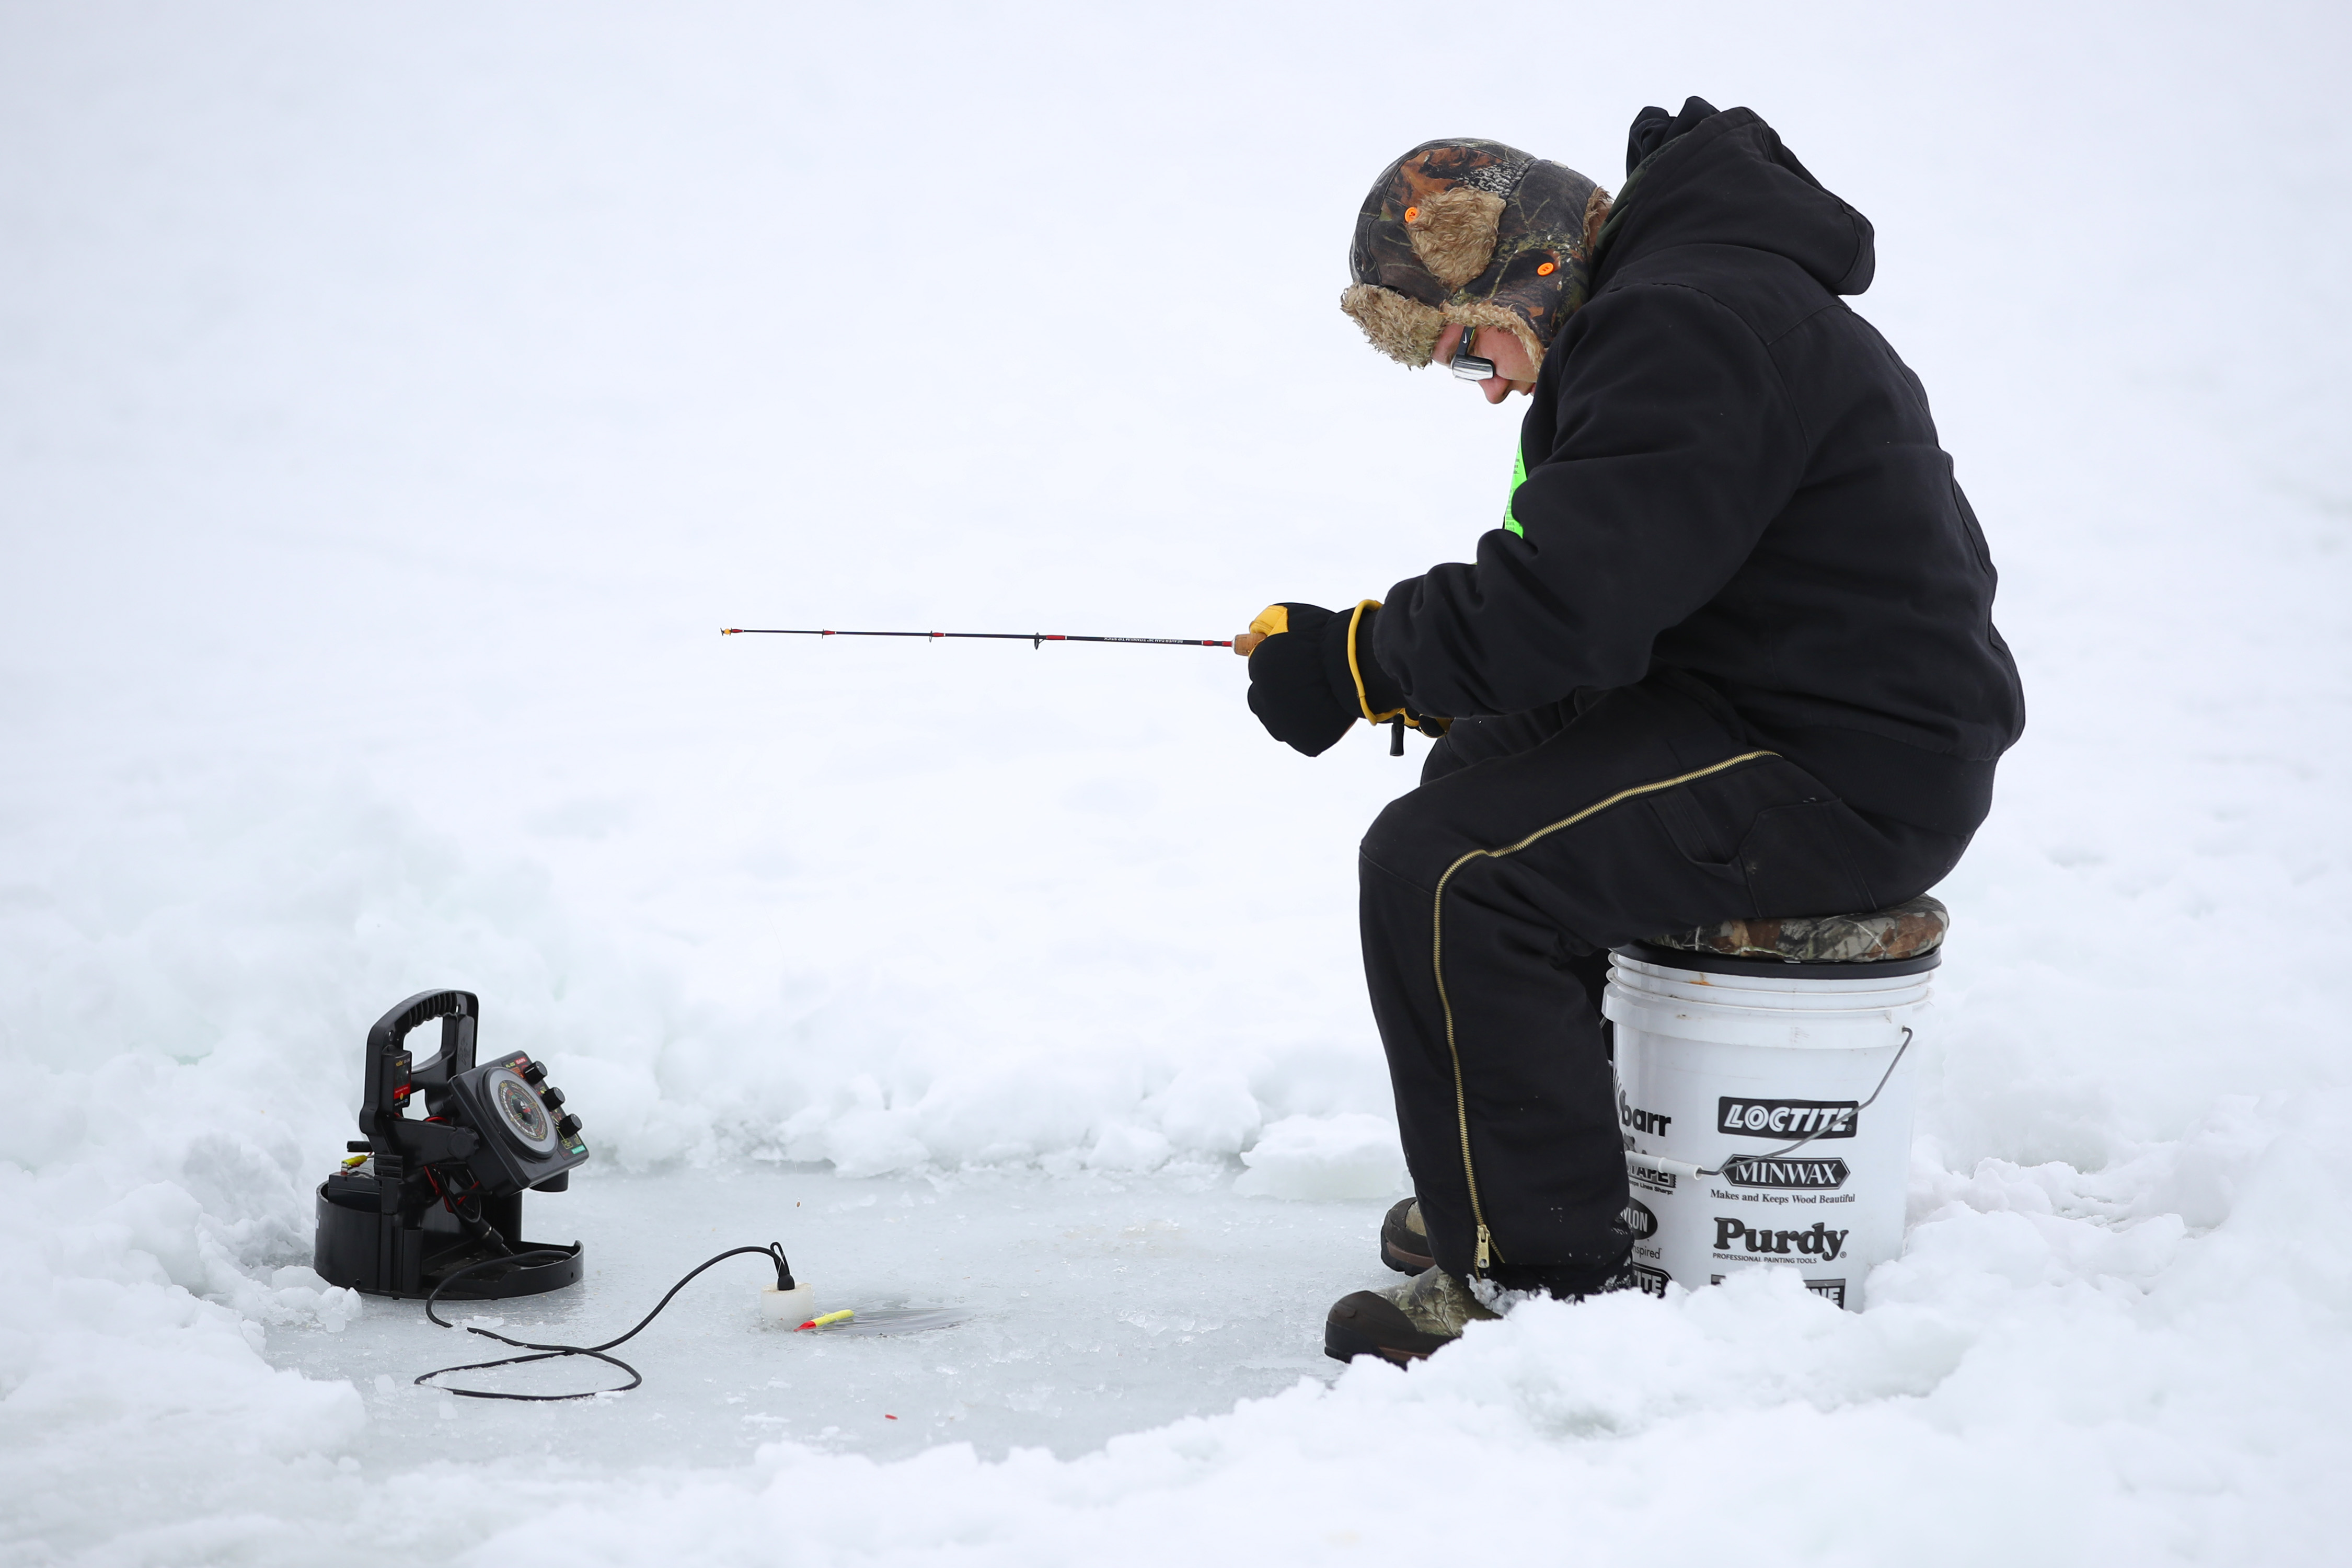 Ice fishing safety tips: How to tell if ice is safe, what to do if